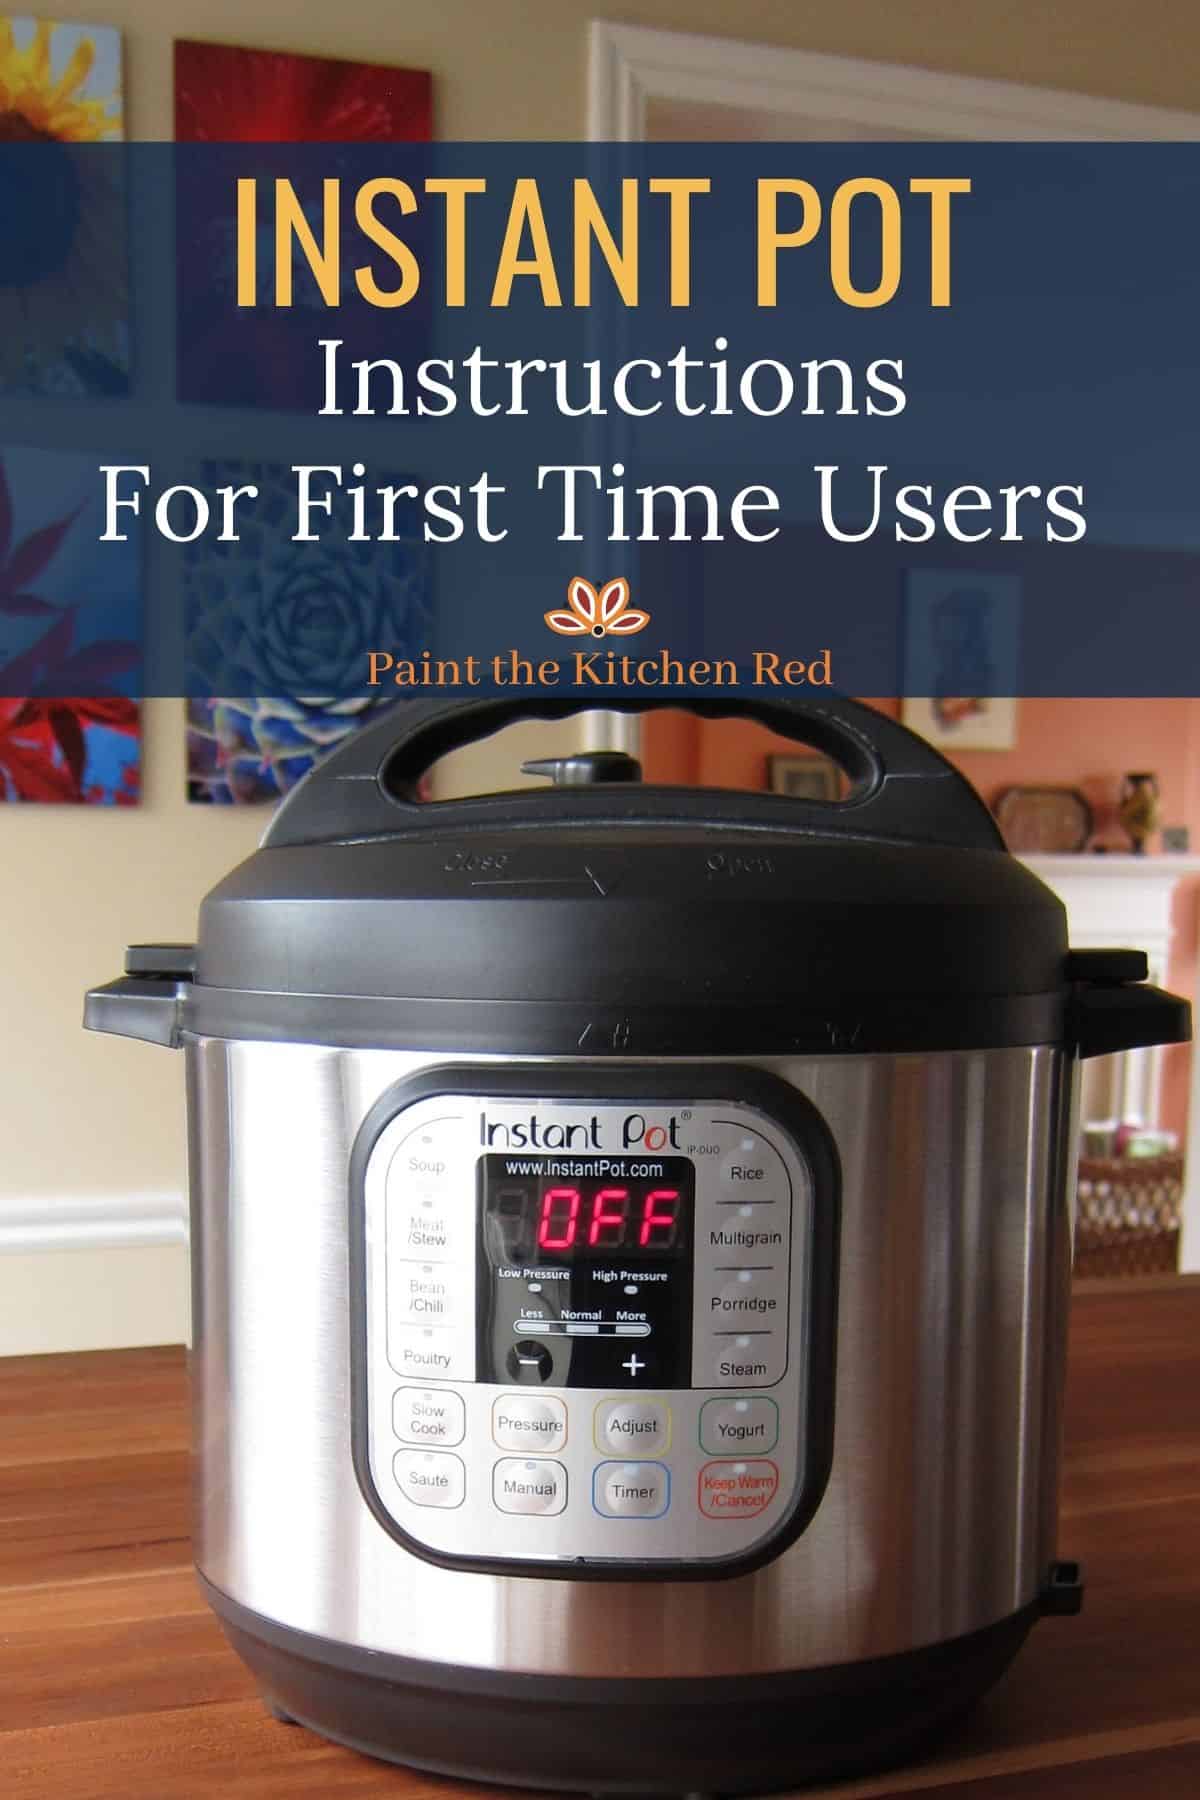 Instant Pot instructions for first time users - Instant Pot on wooden countertop